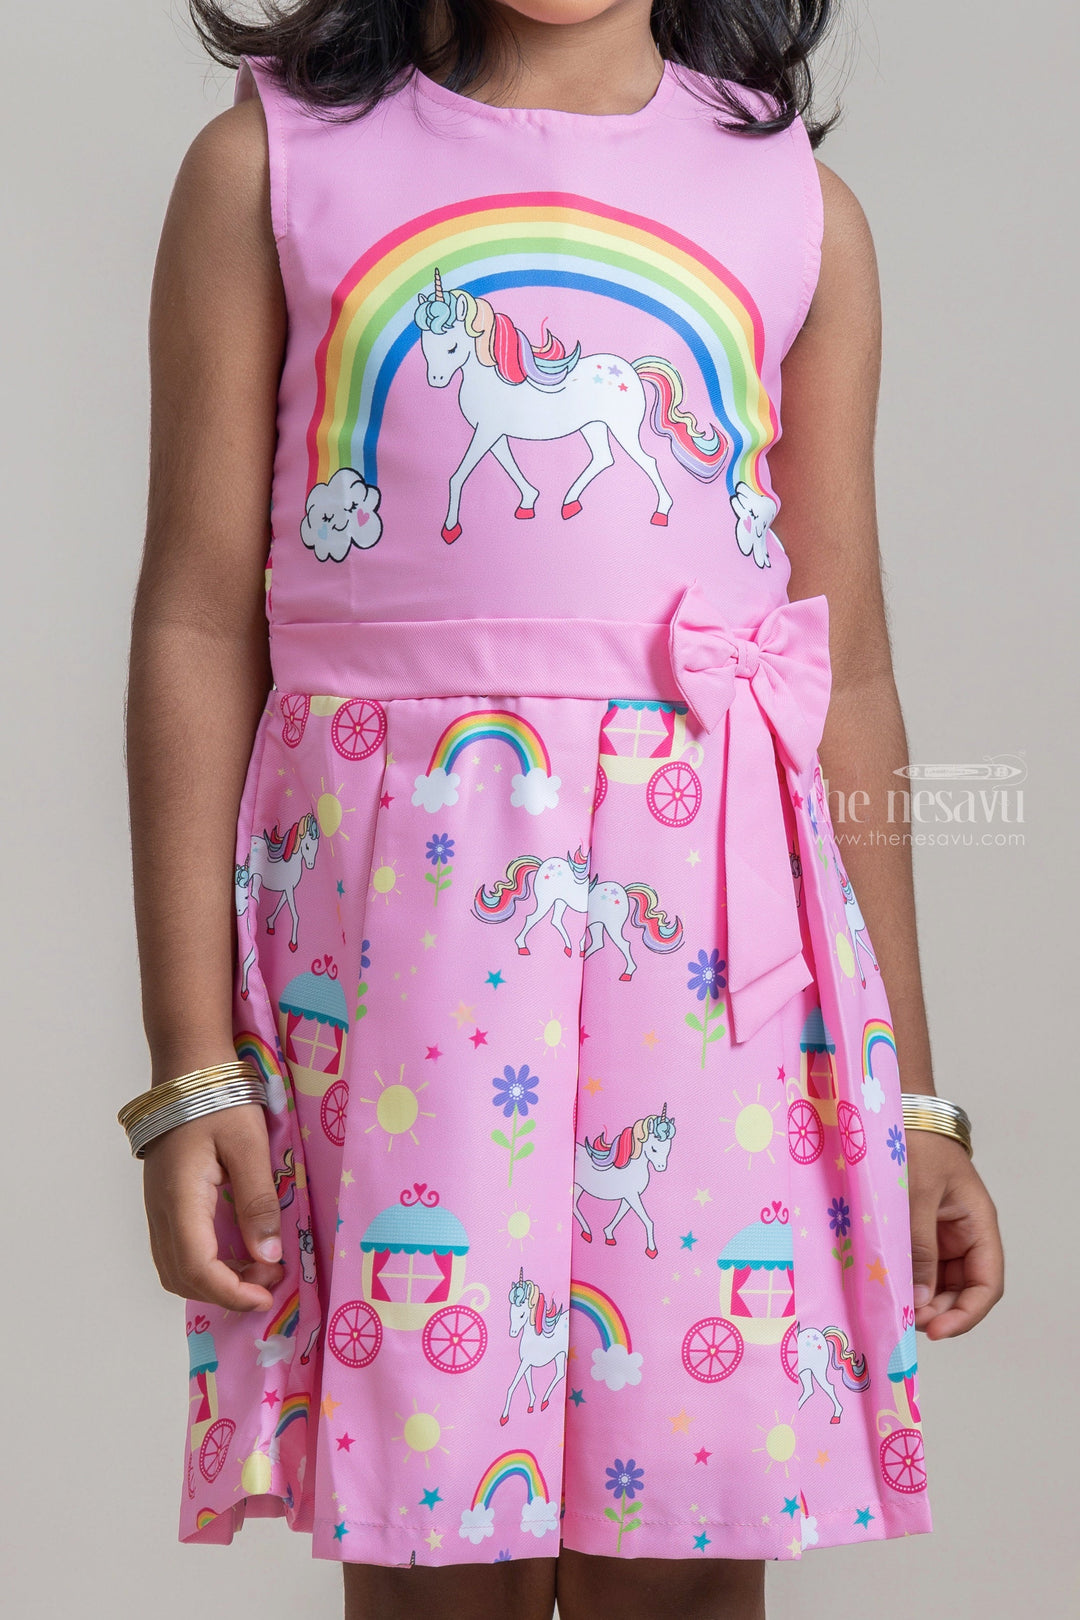 The Nesavu Baby Fancy Frock Gorgeous Unicorn and Rainbow Printed Pink Frock For Baby Girls Nesavu Latest Baby Frock Collection | Premium Cotton Frocks | The Nesavu